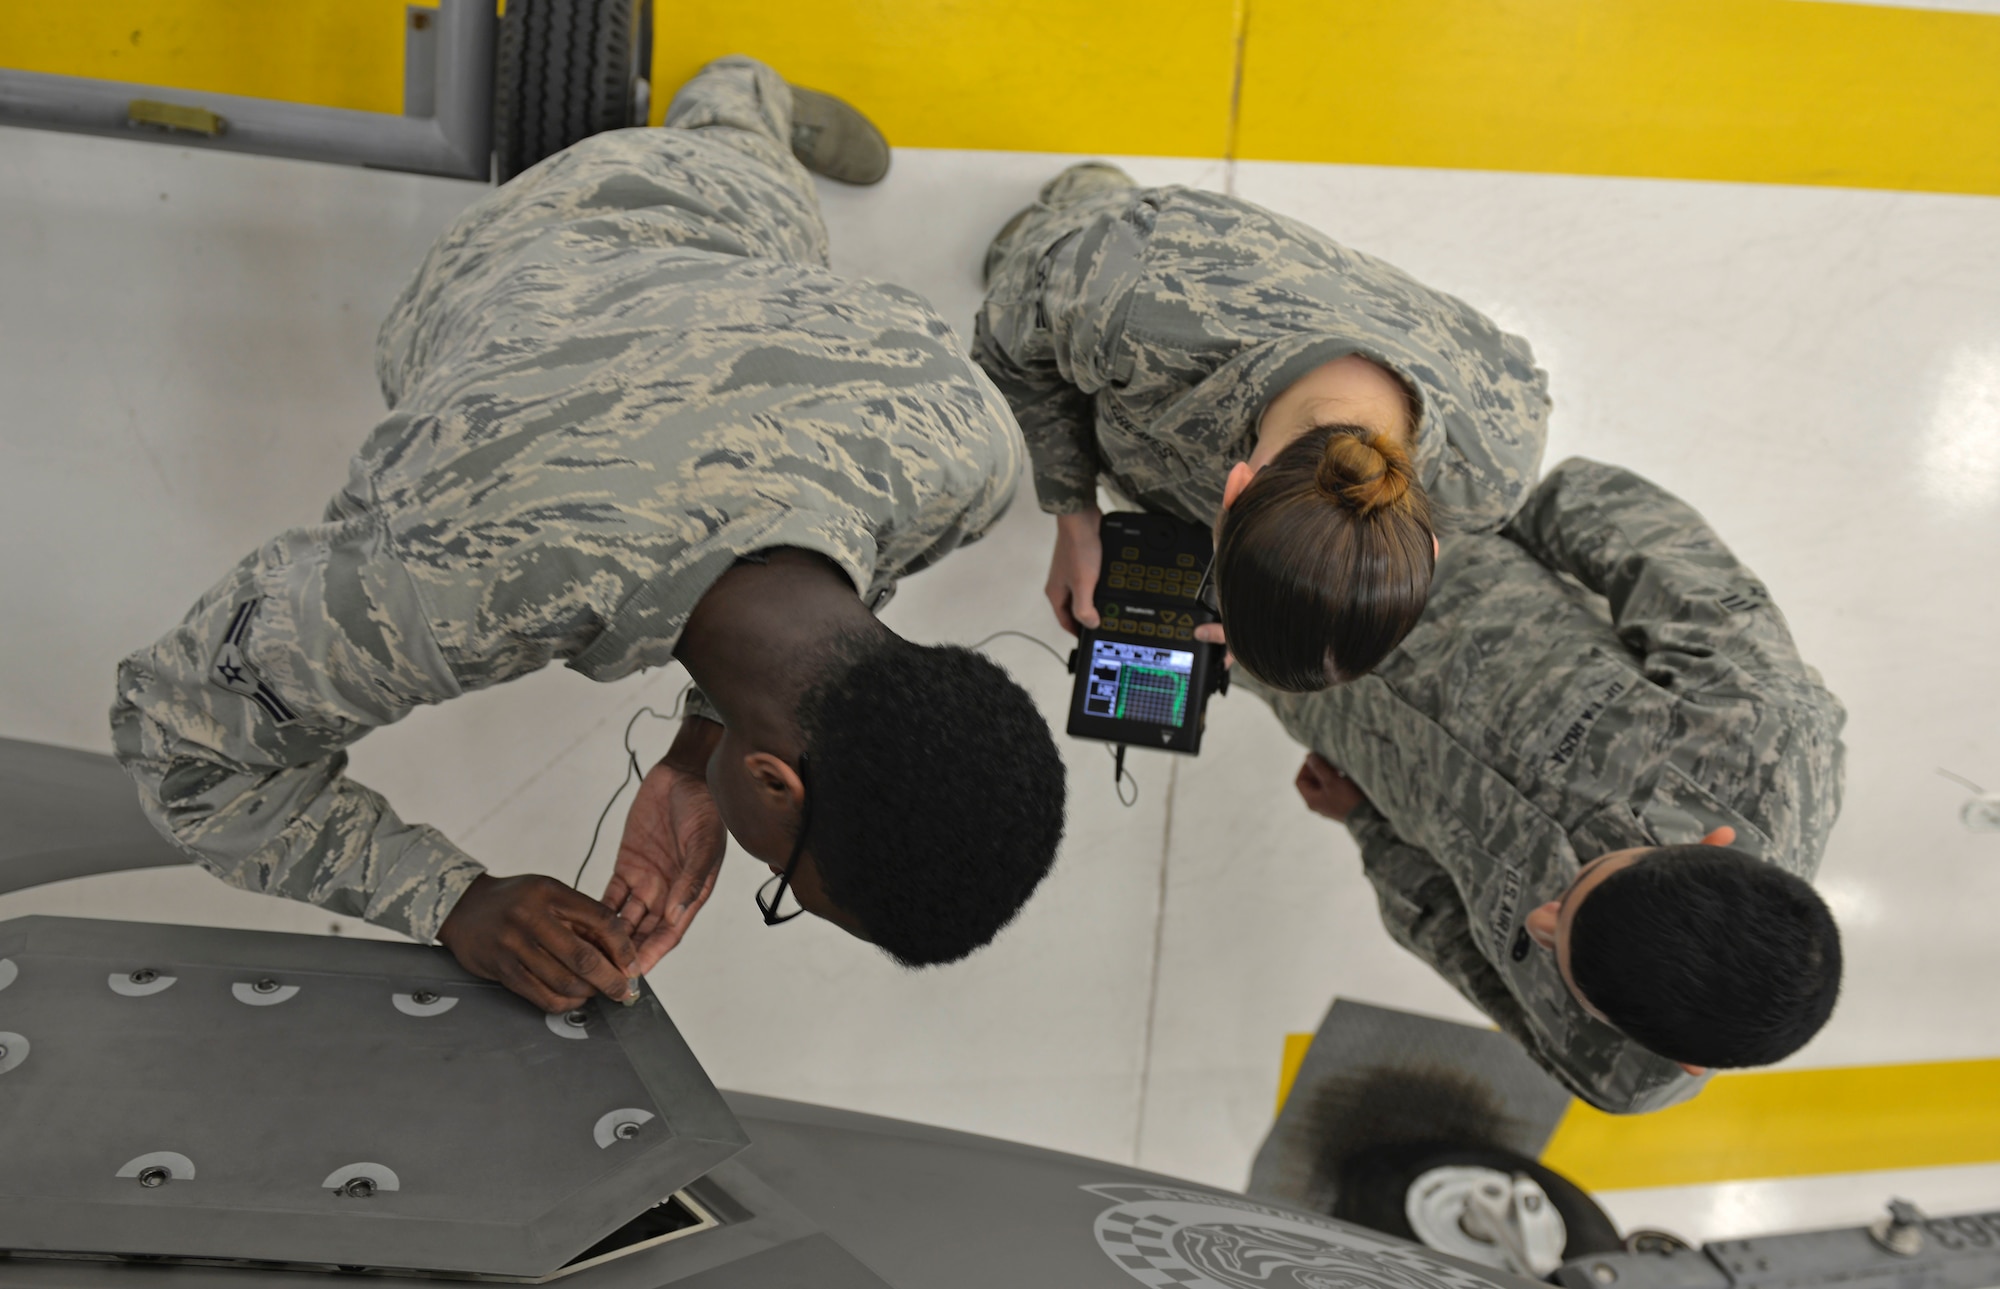 Nondestructive inspection Airmen check an F-35A Lightning II panel for wear and tear at Eglin Air Force Base Fla., May 16, 2016. These specialists use a transducer and a Sonic 1200 to inspect the inner layers of metal objects for metal fatigue resulting from the daily function of jets. The transducer creates sound vibrations and sends the readings to the Sonic 1200 to reveal the depth of damage inside the metal of an aircraft. (U.S. Air Force photo/Senior Airman Andrea Posey)